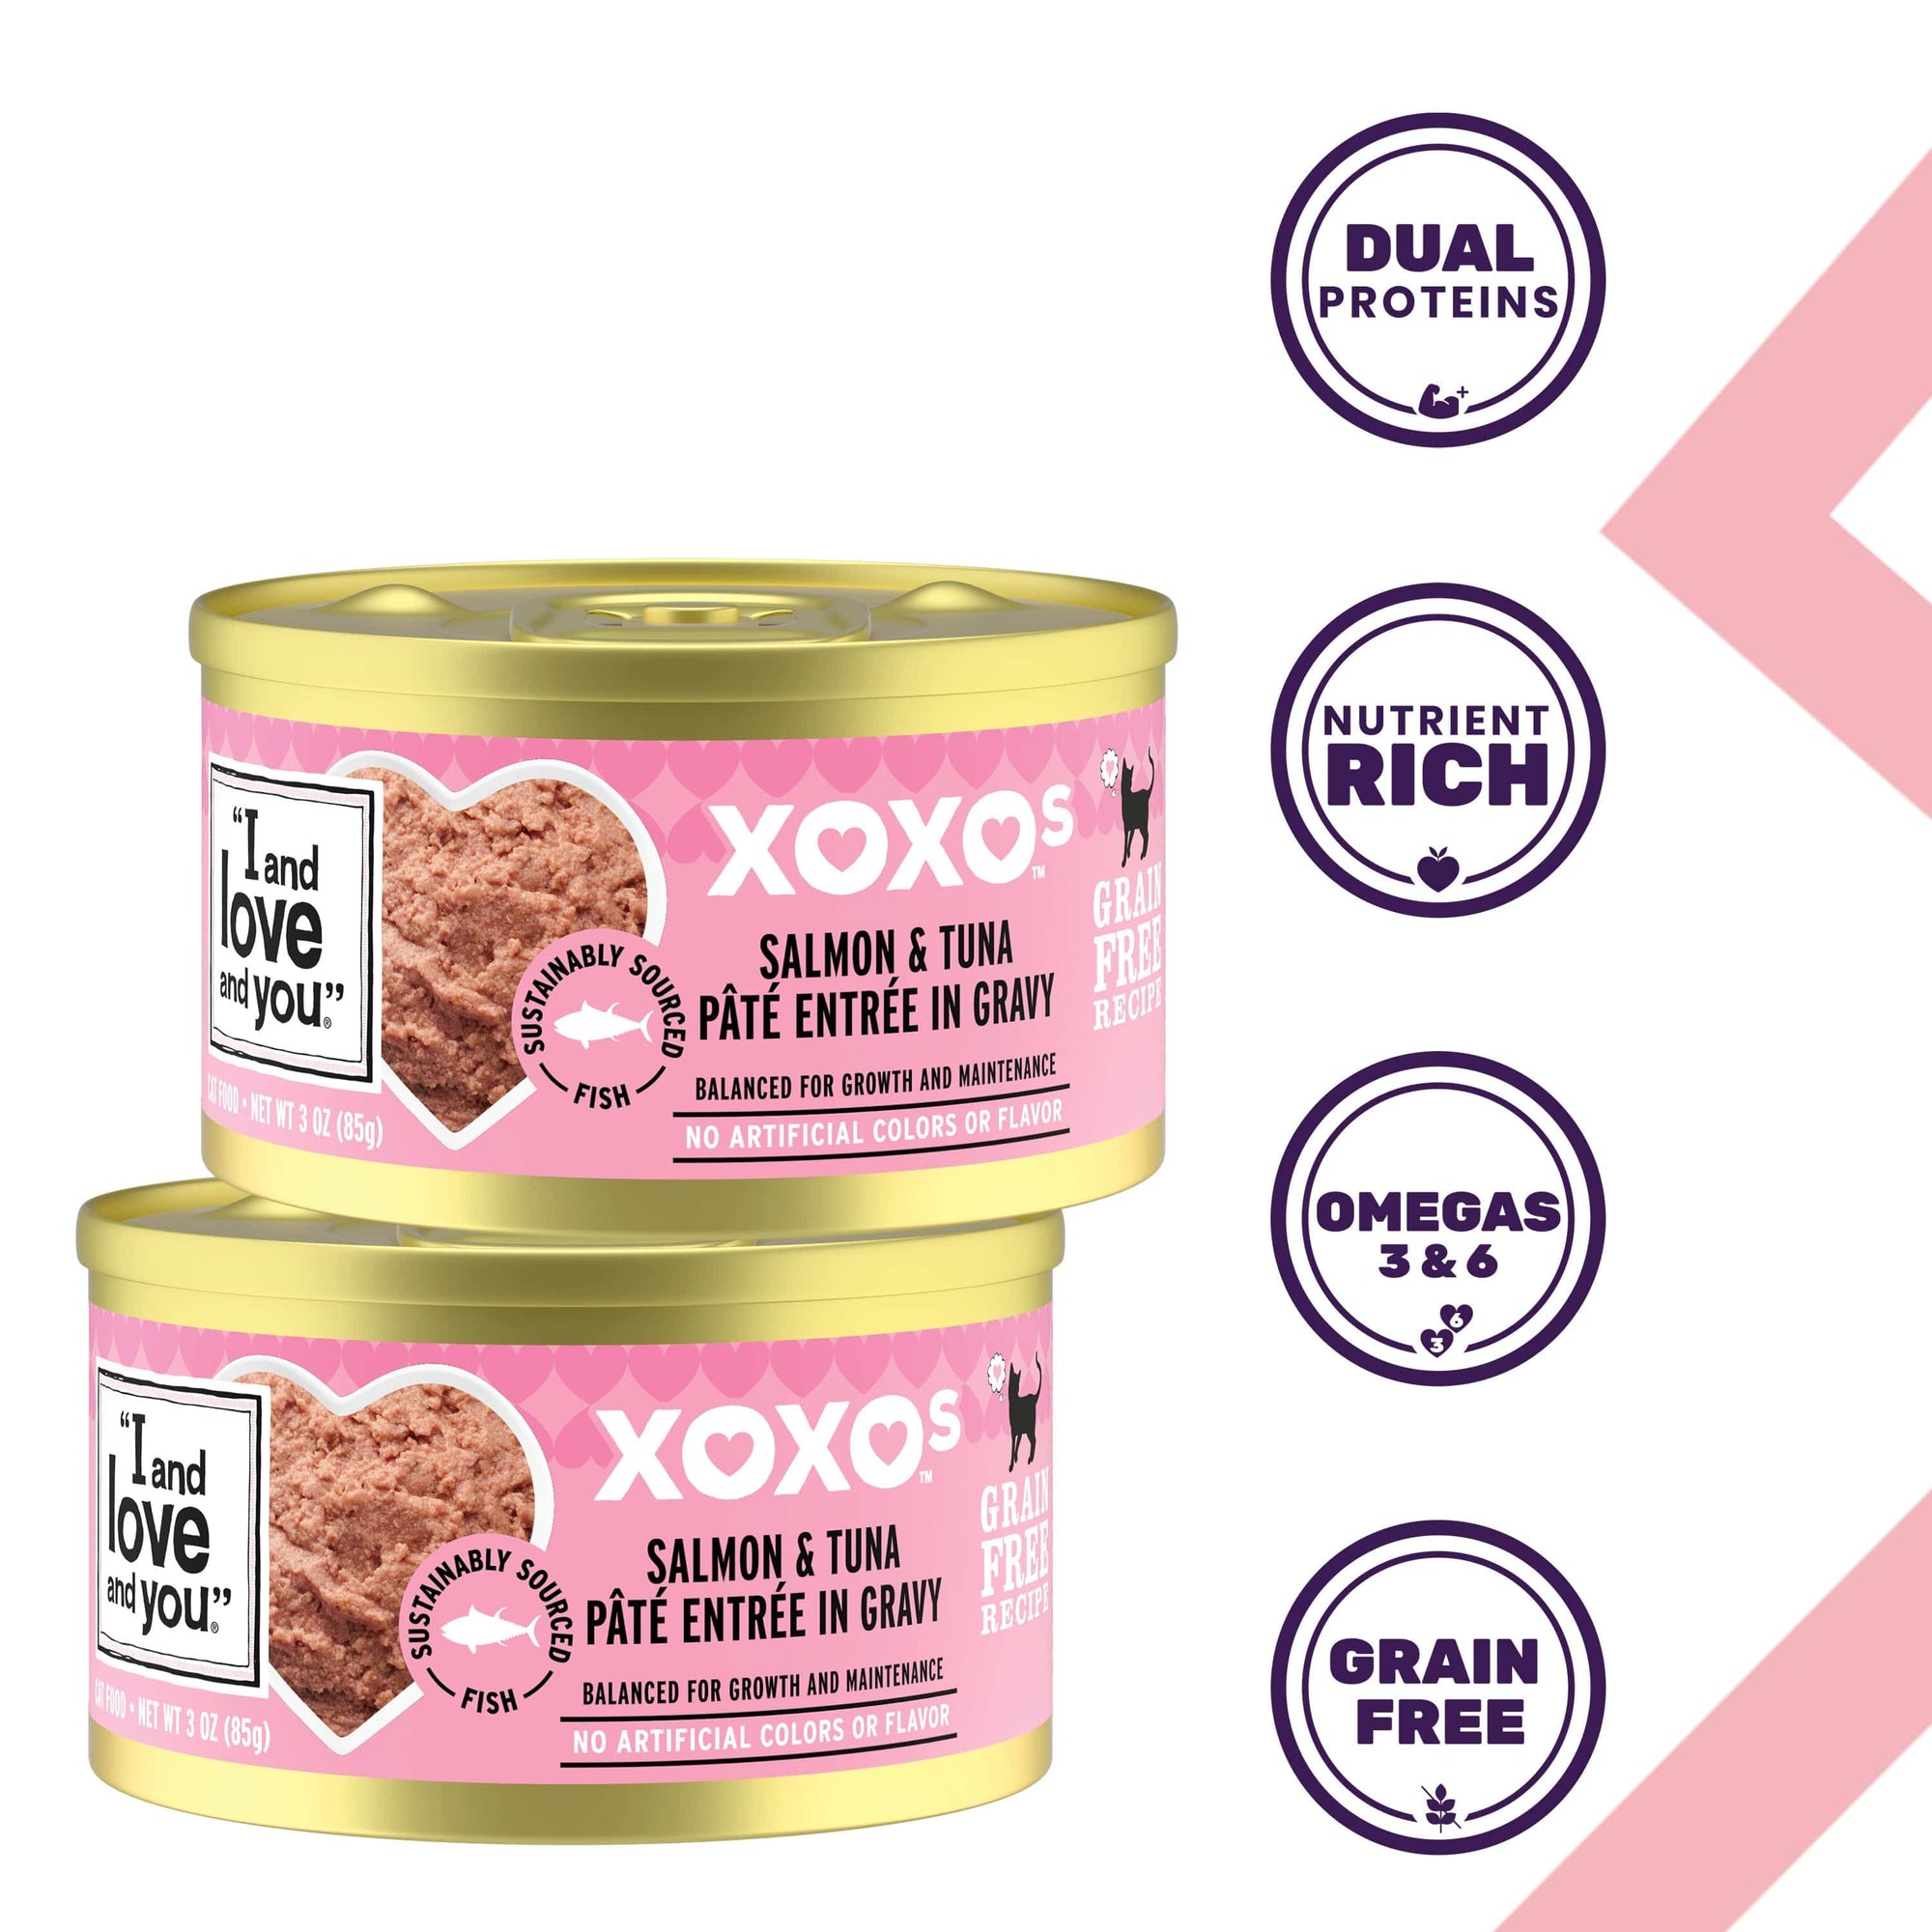 Close-up of two cans of XOXOs Salmon & Tuna Pate with labels, a purple circle with text, and a pink label with a fish.